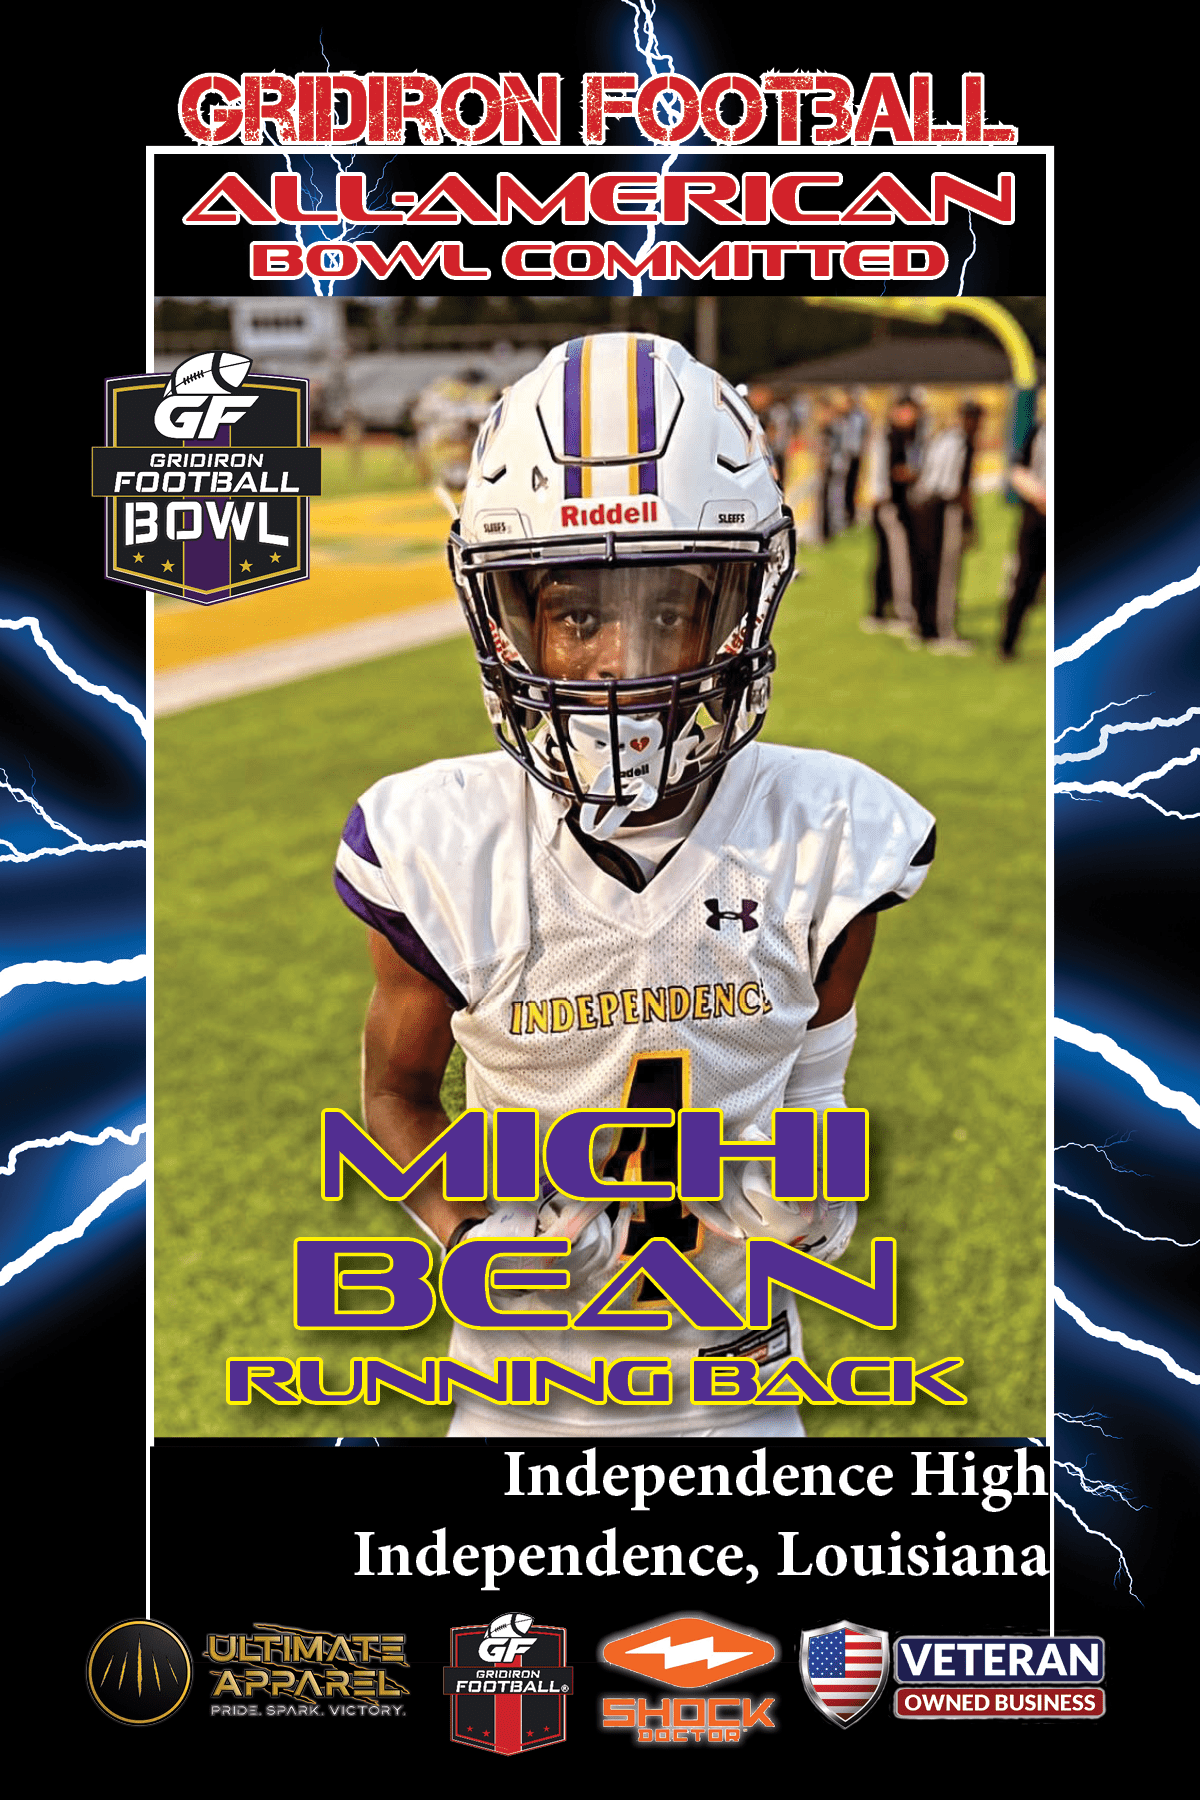 Gridiron Football Bowl Game Commitment: RB Michi Bean, Independence High School (La,)